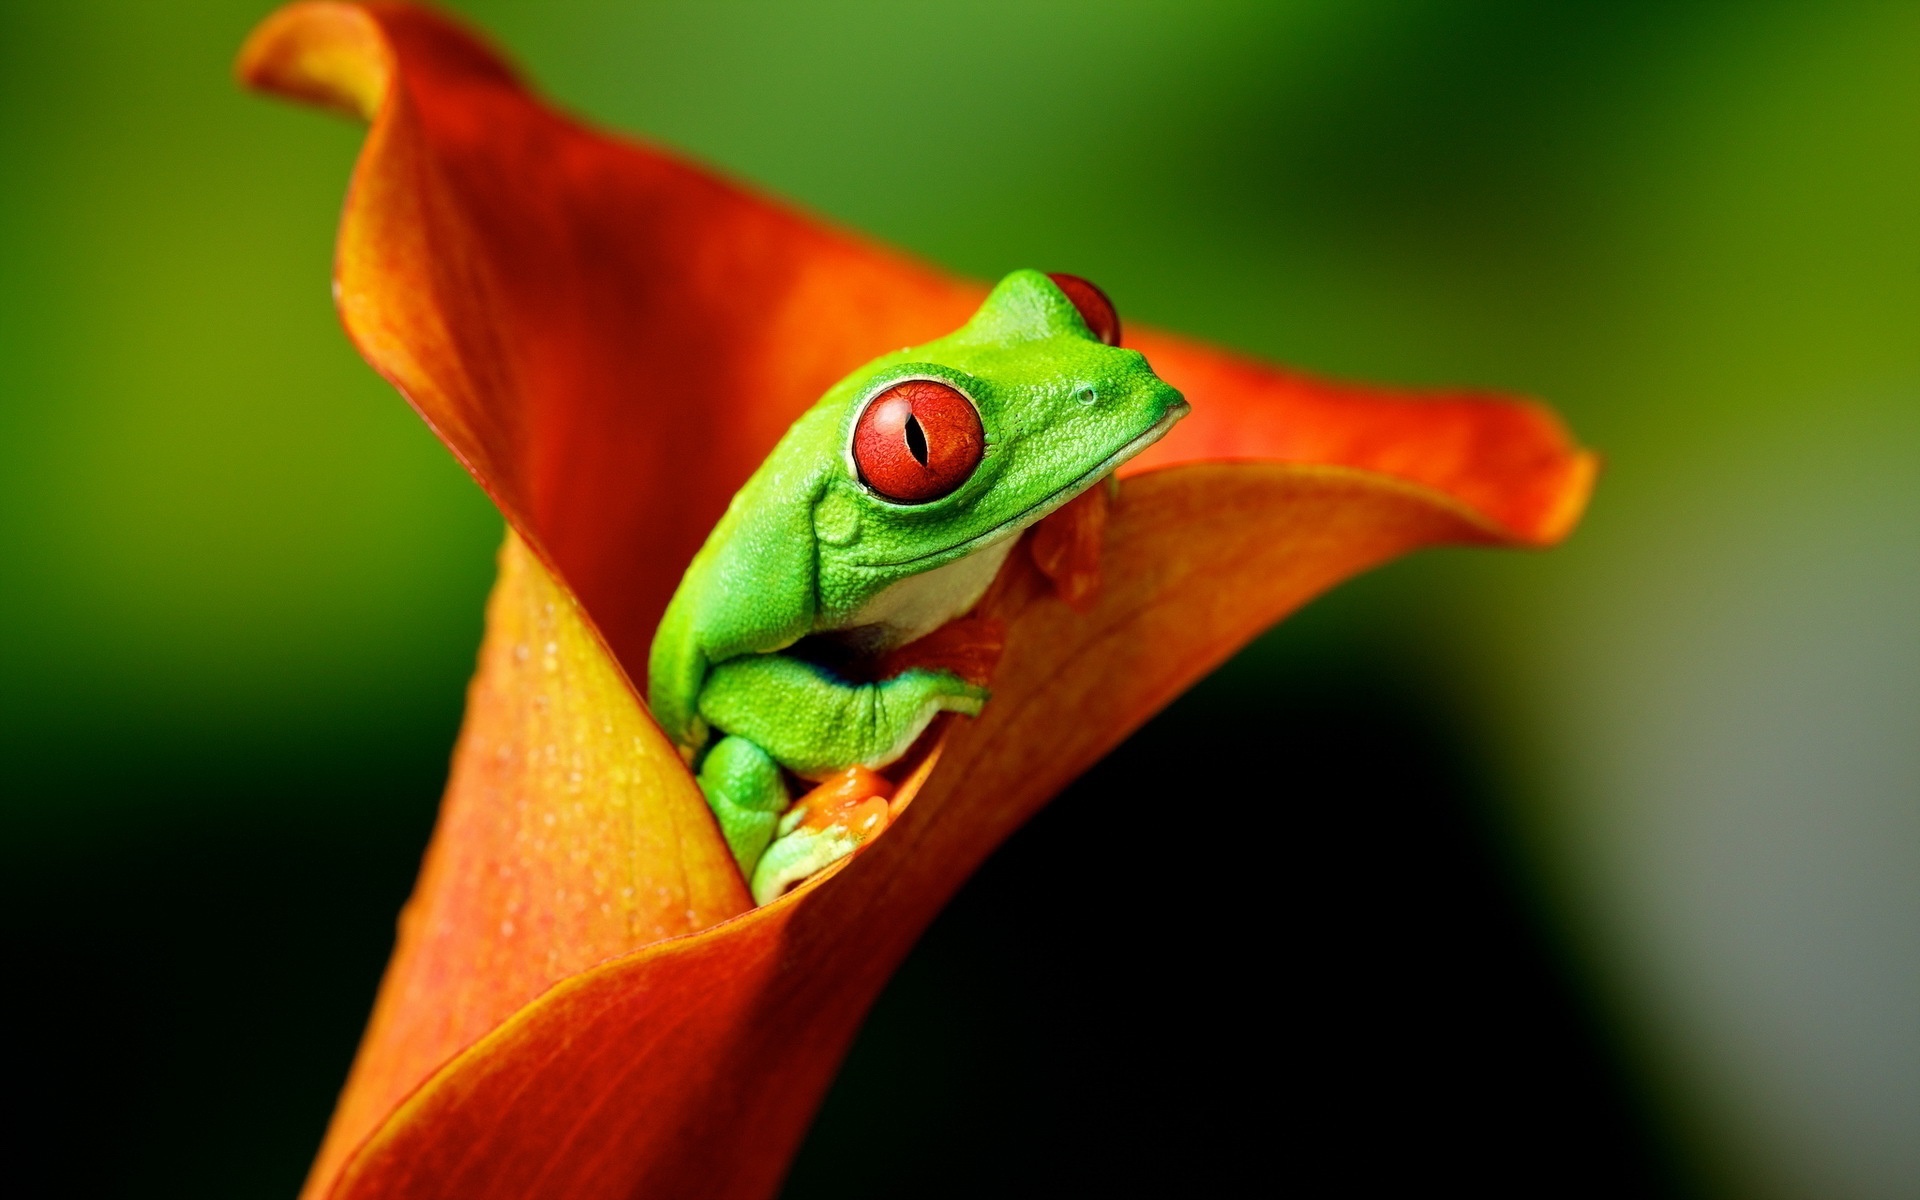 Red-eyed tree frog wallpapers, Colorful amphibian, Wallpaper collection, Animal photography, 1920x1200 HD Desktop